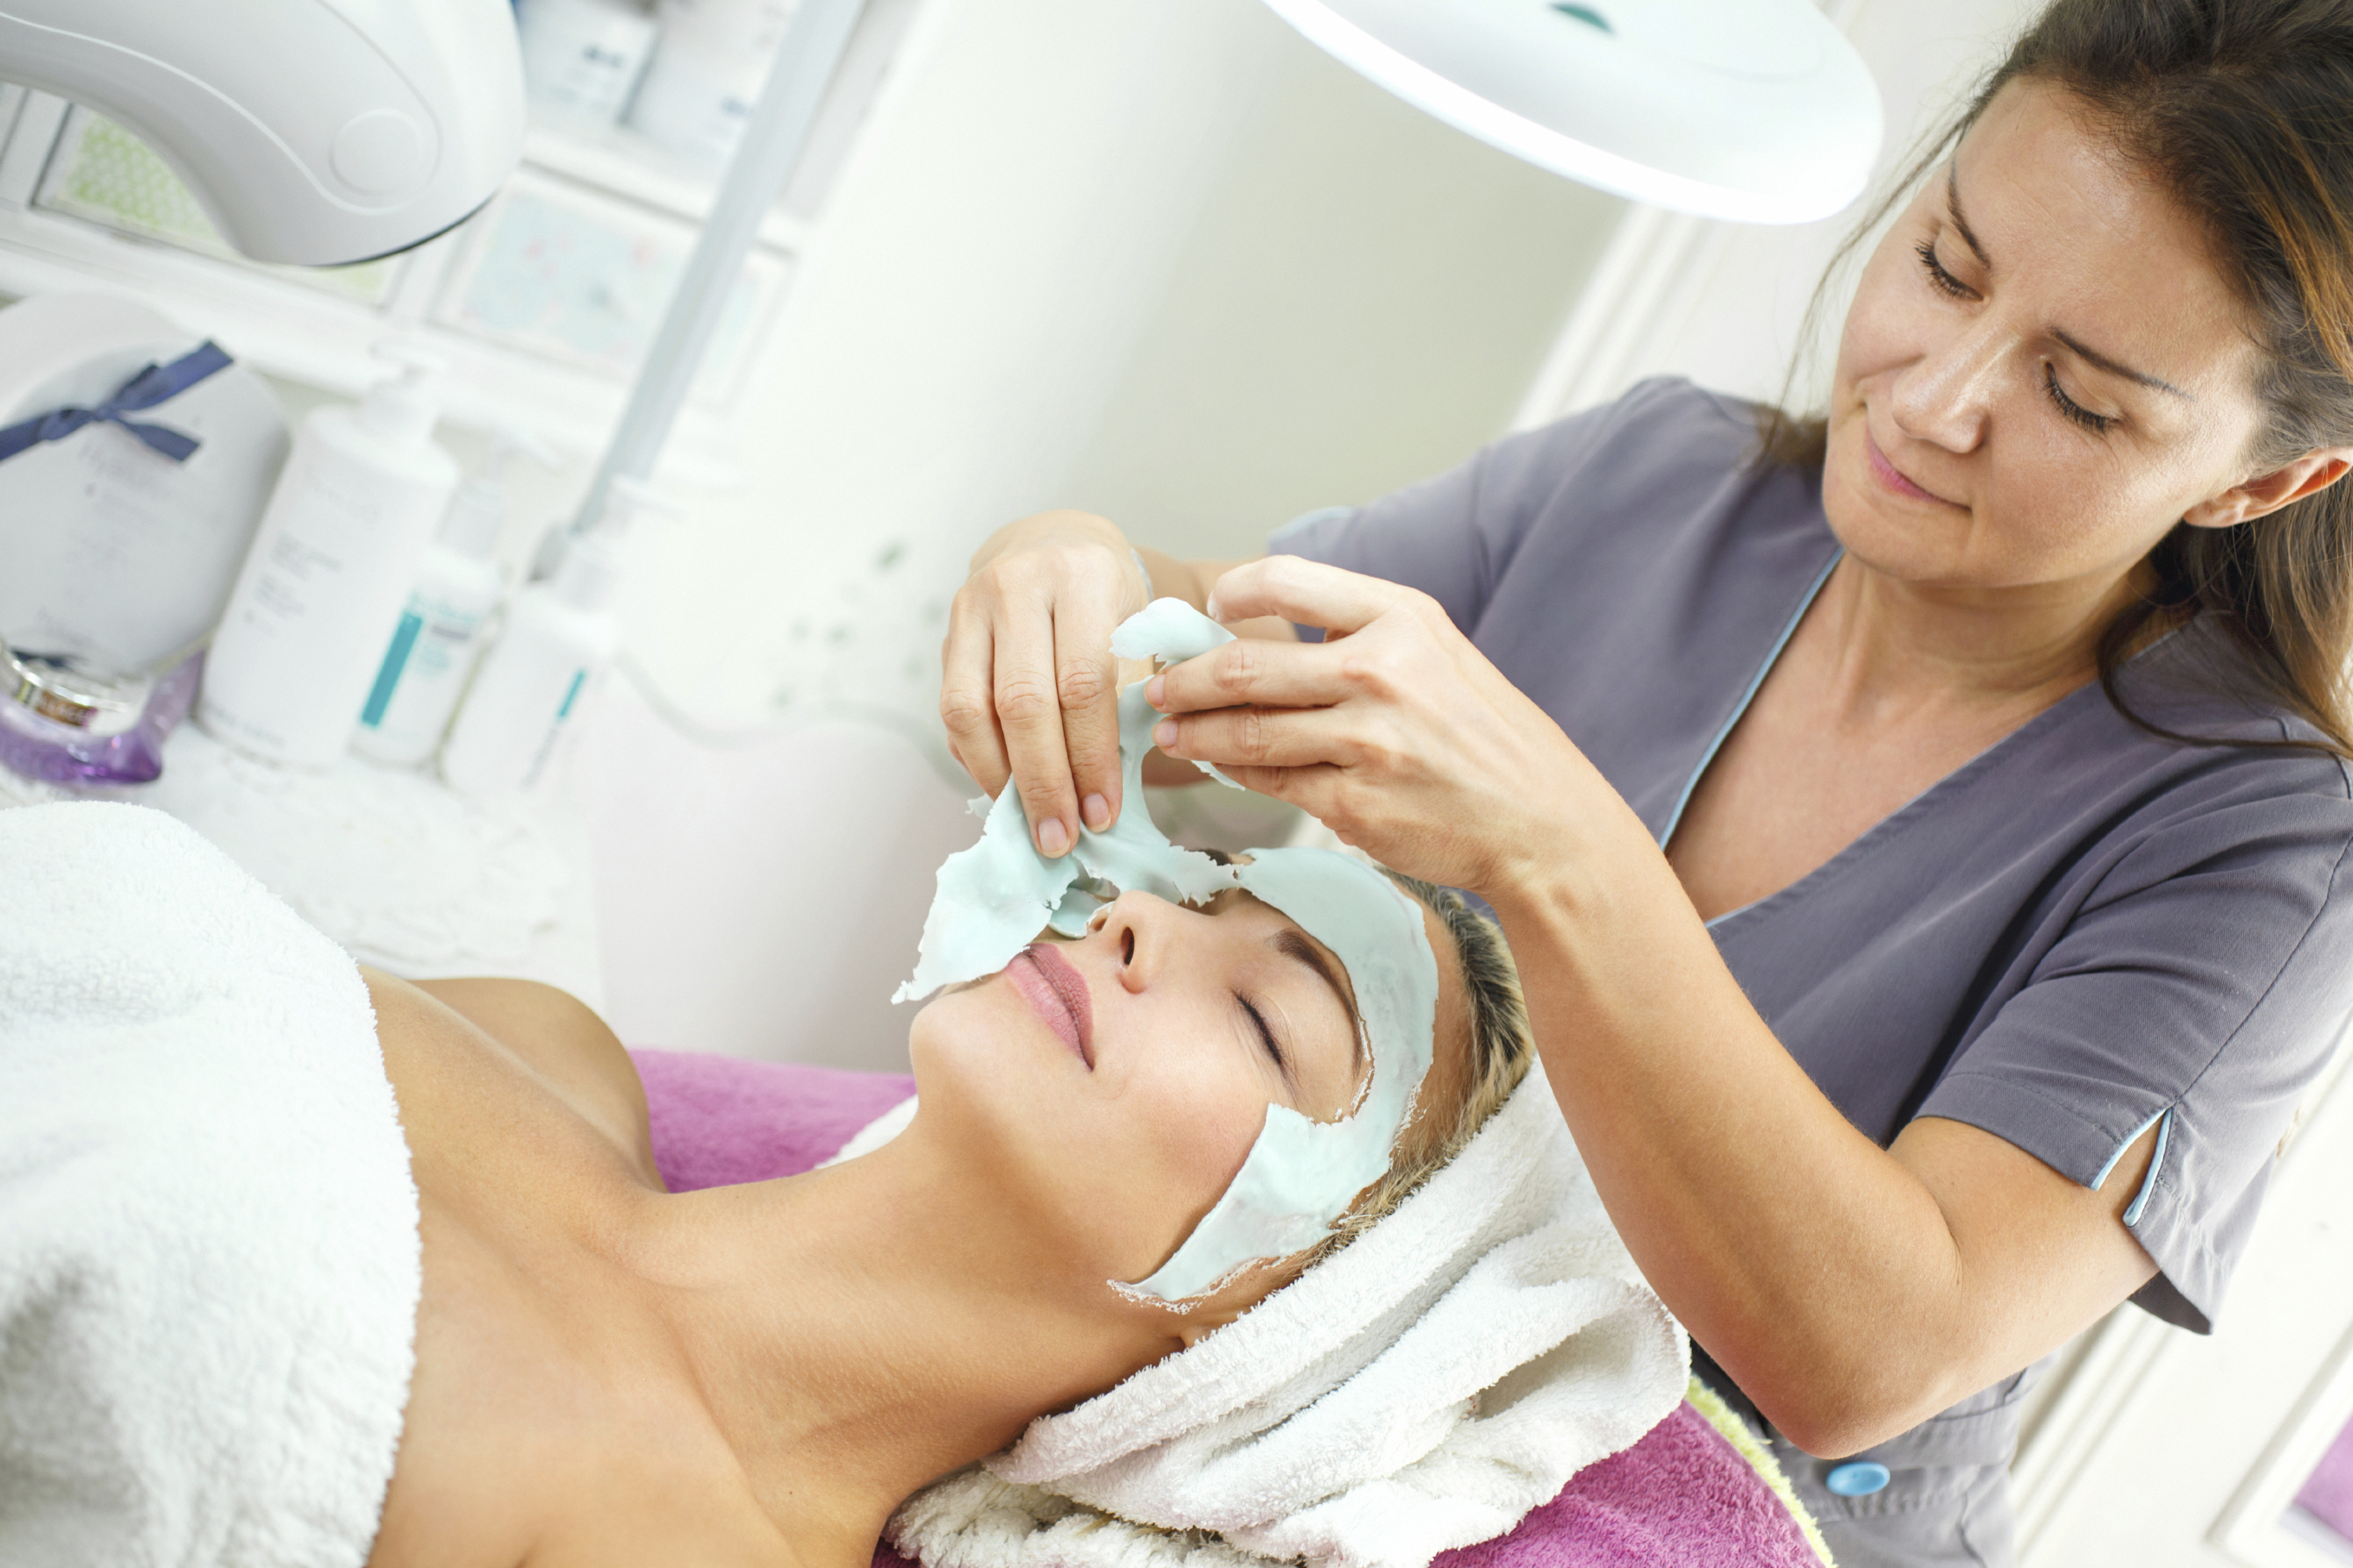 Professional Female Esthetician Removing Facial Mask From Female Client